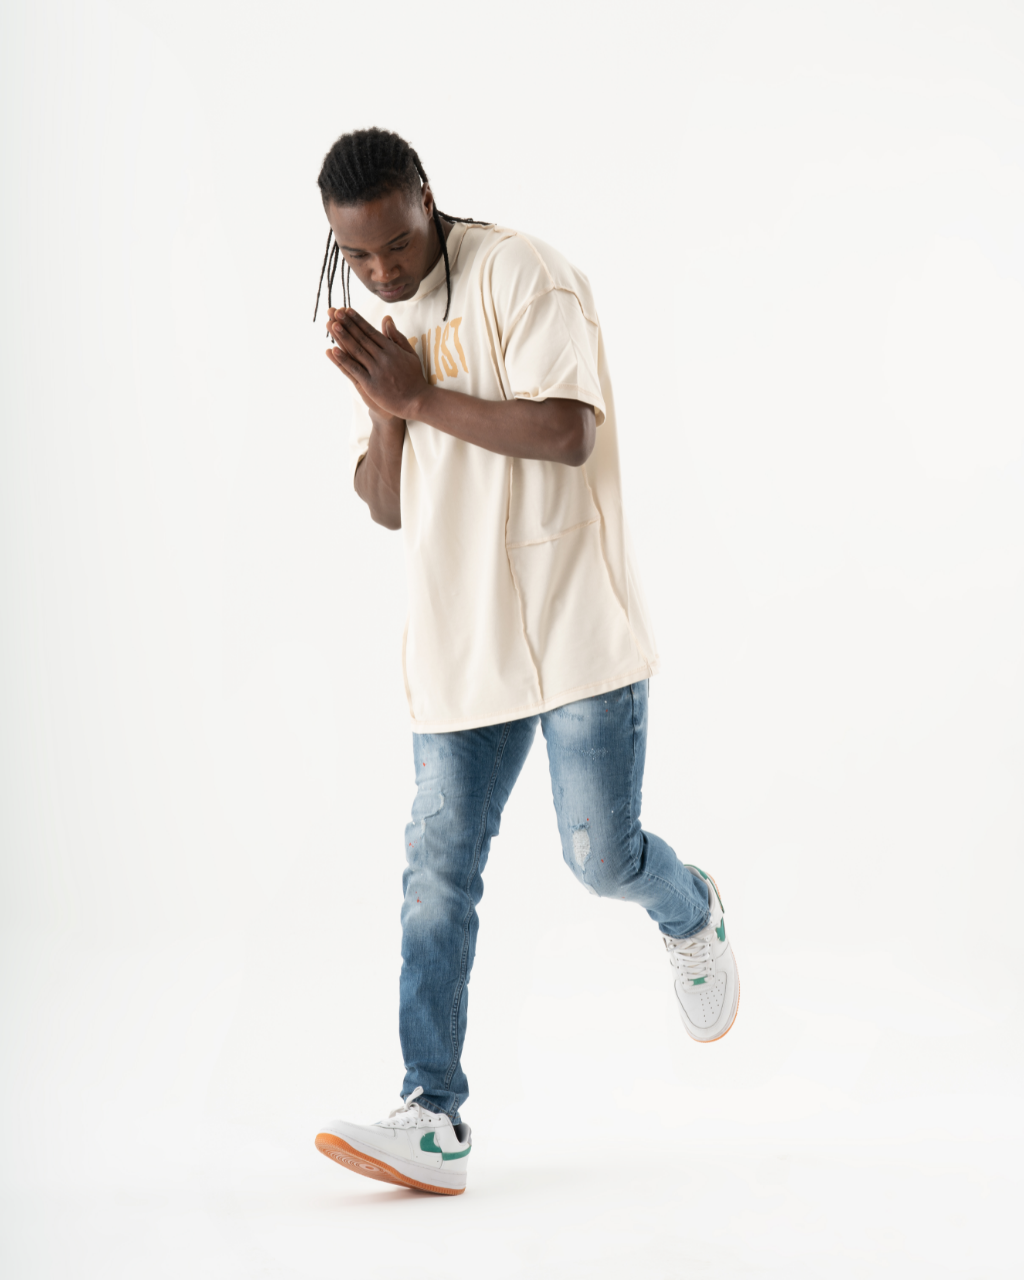 A man in a TEZAR t-shirt and ripped jeans standing on a white background.